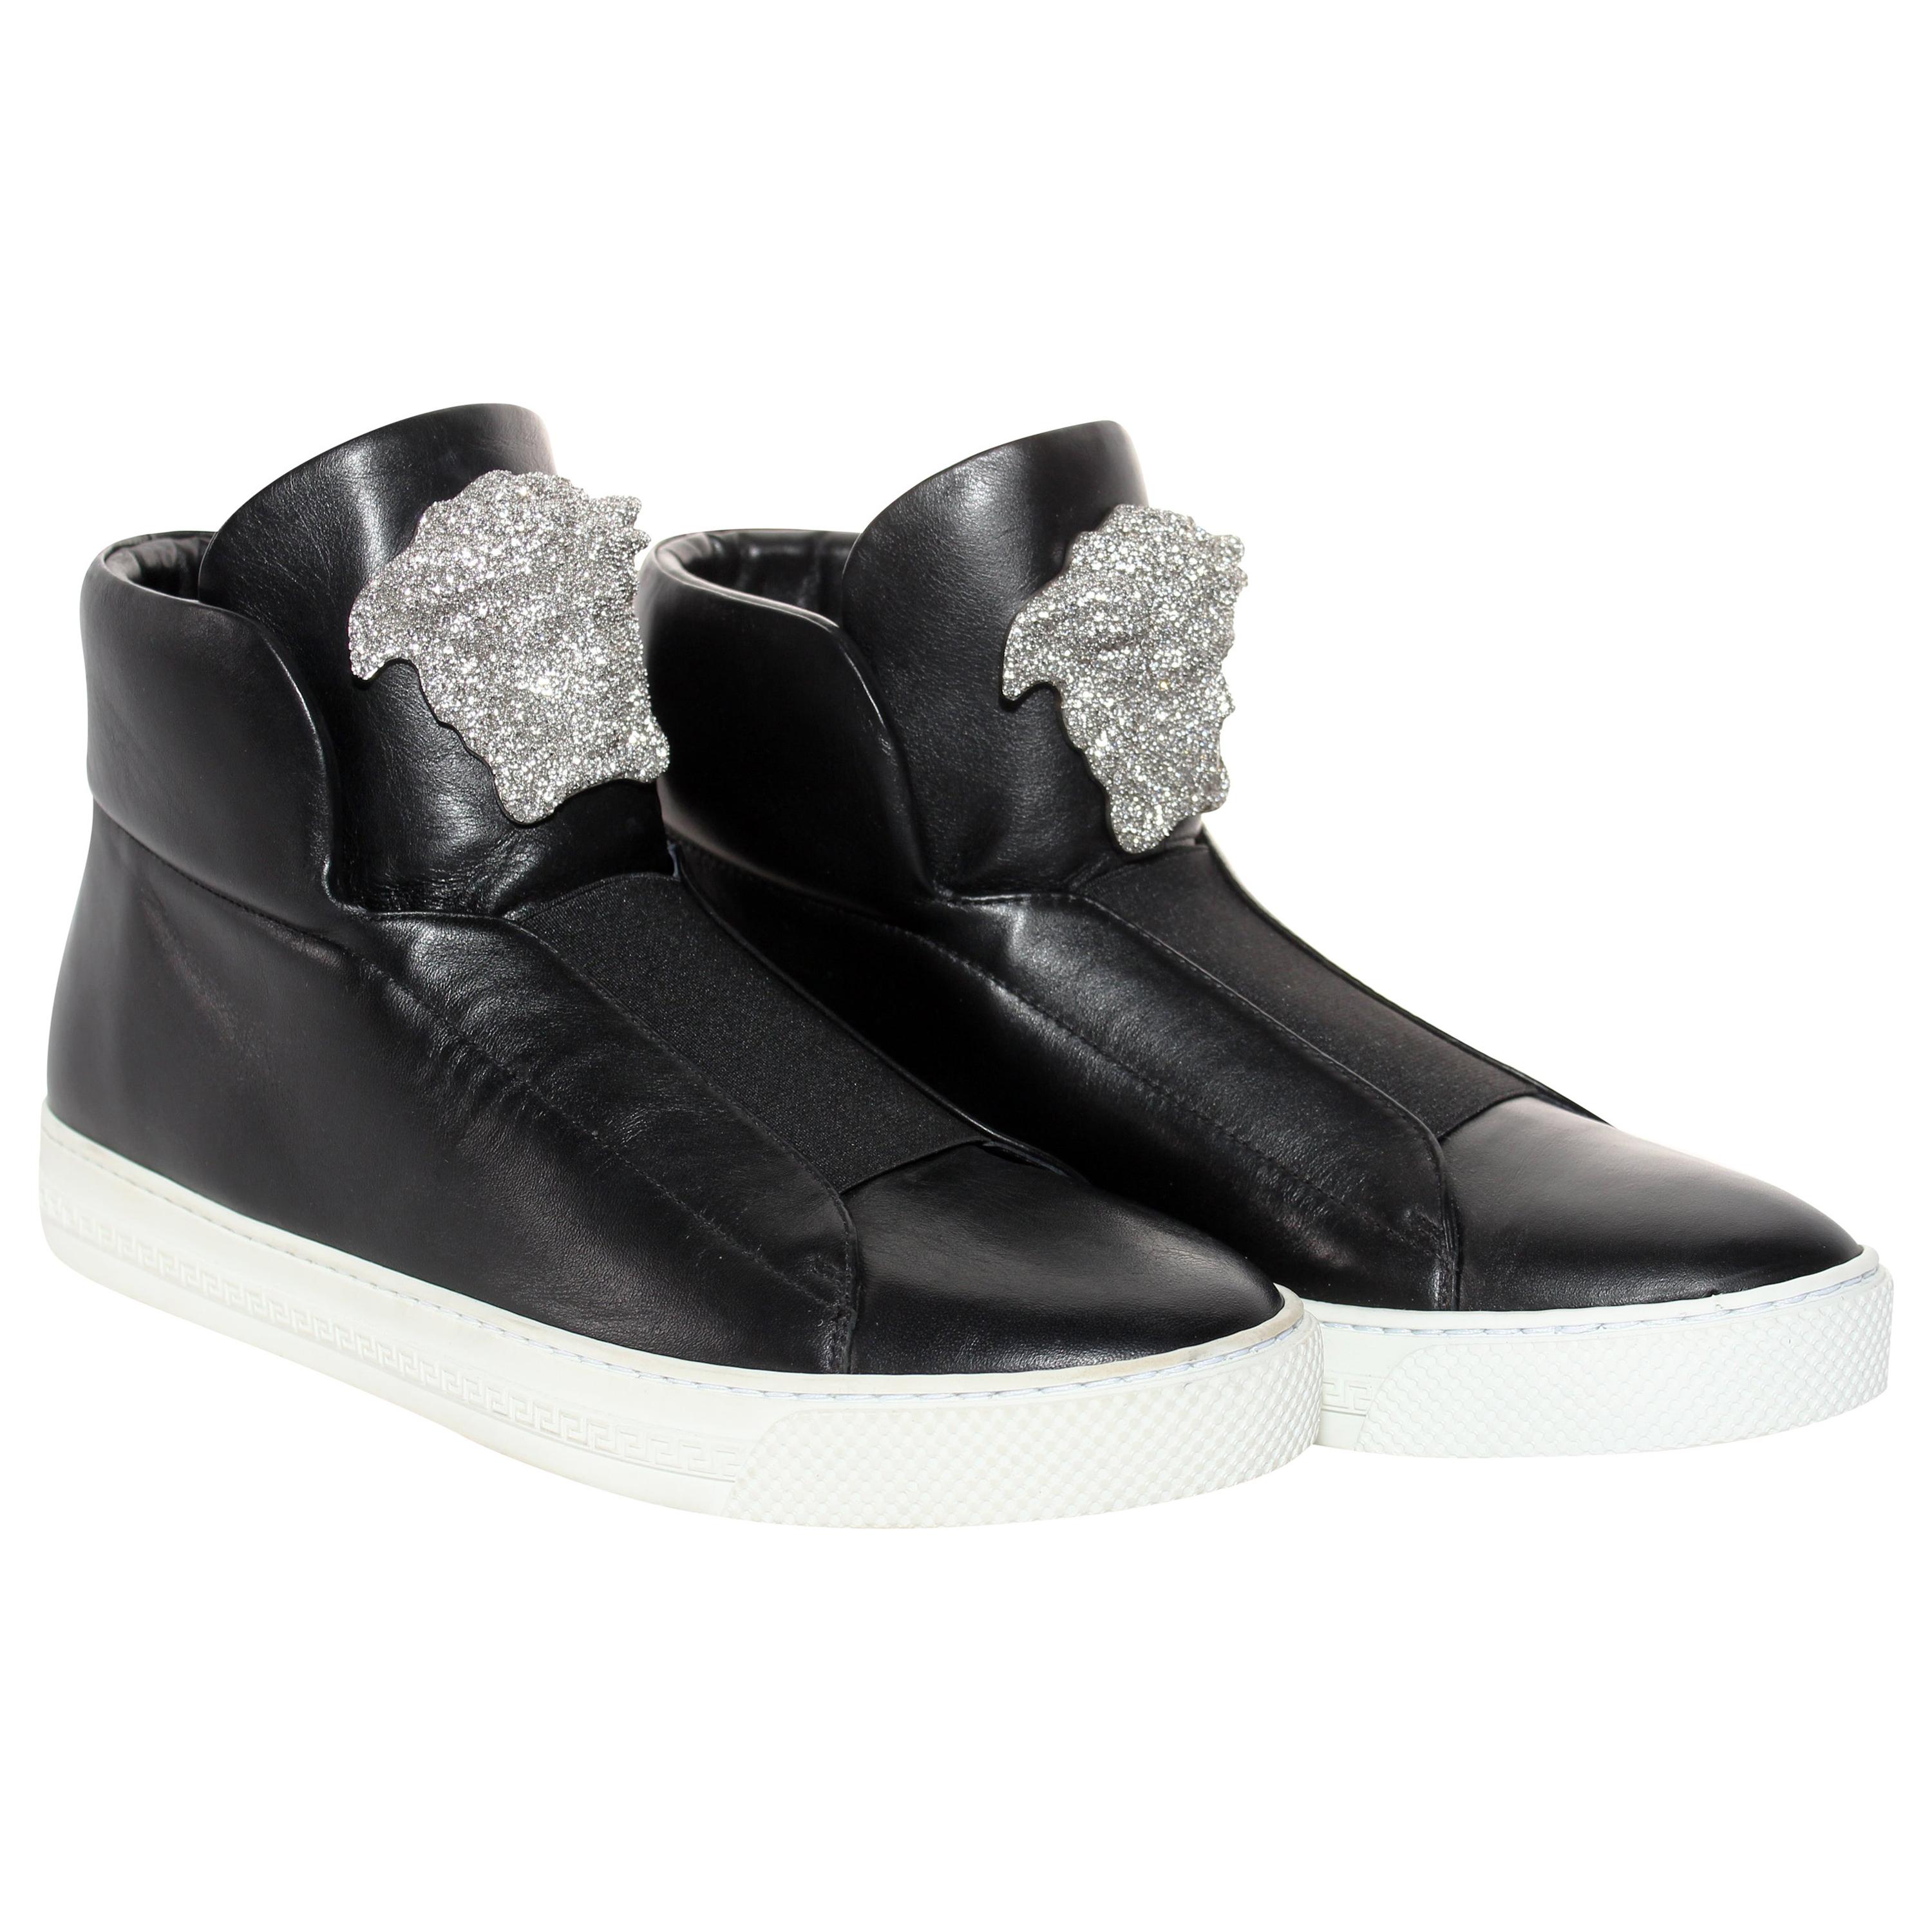 New Versace SoHo Exclusive Crystal Embellished Black Leather Sneakers Size 41 For Sale